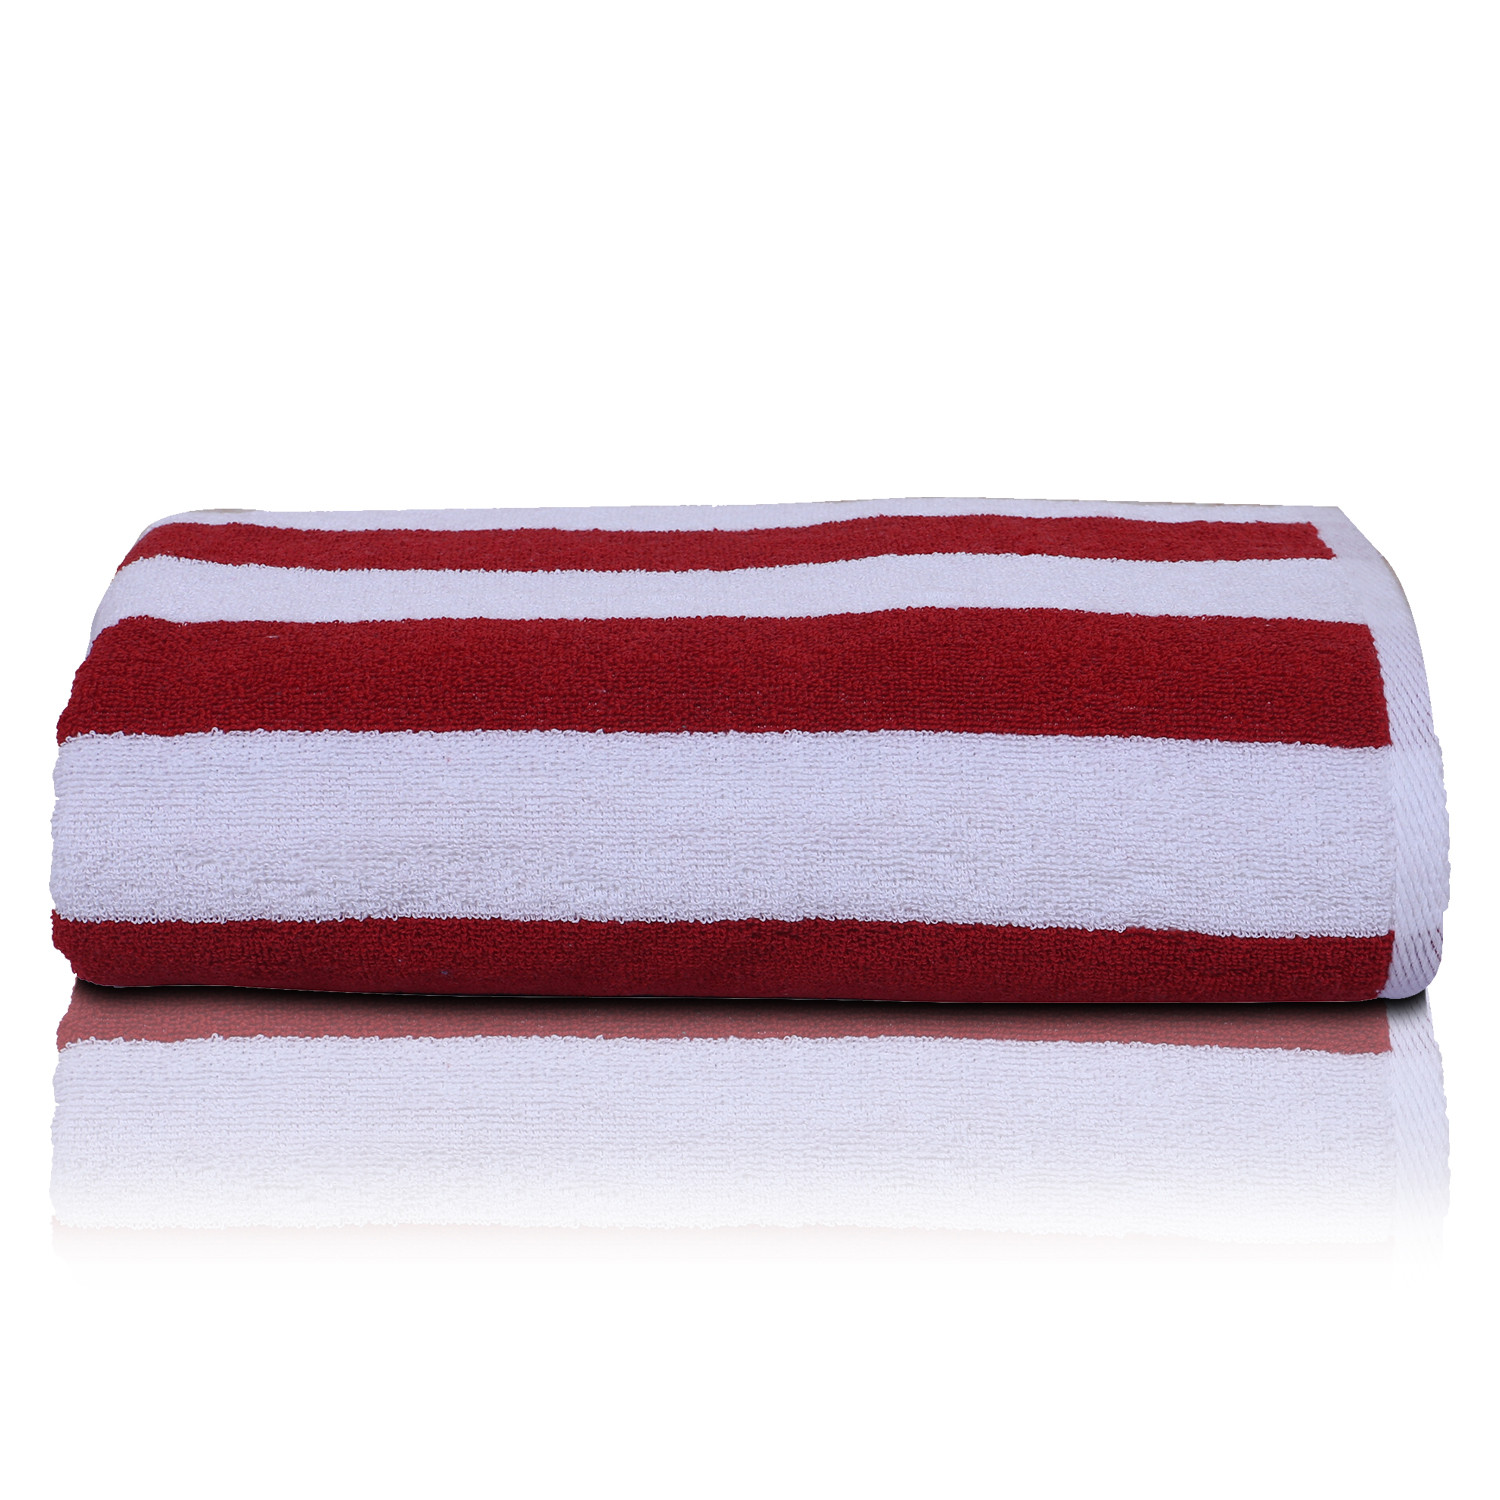 Kuber Industries Cotton Super Absorbent Bath Towel|Quick Dry Towel for Bath,Beach,Pool,Travel,Spa and Yoga,36 x 72 Inches, (Extra Large,Red)